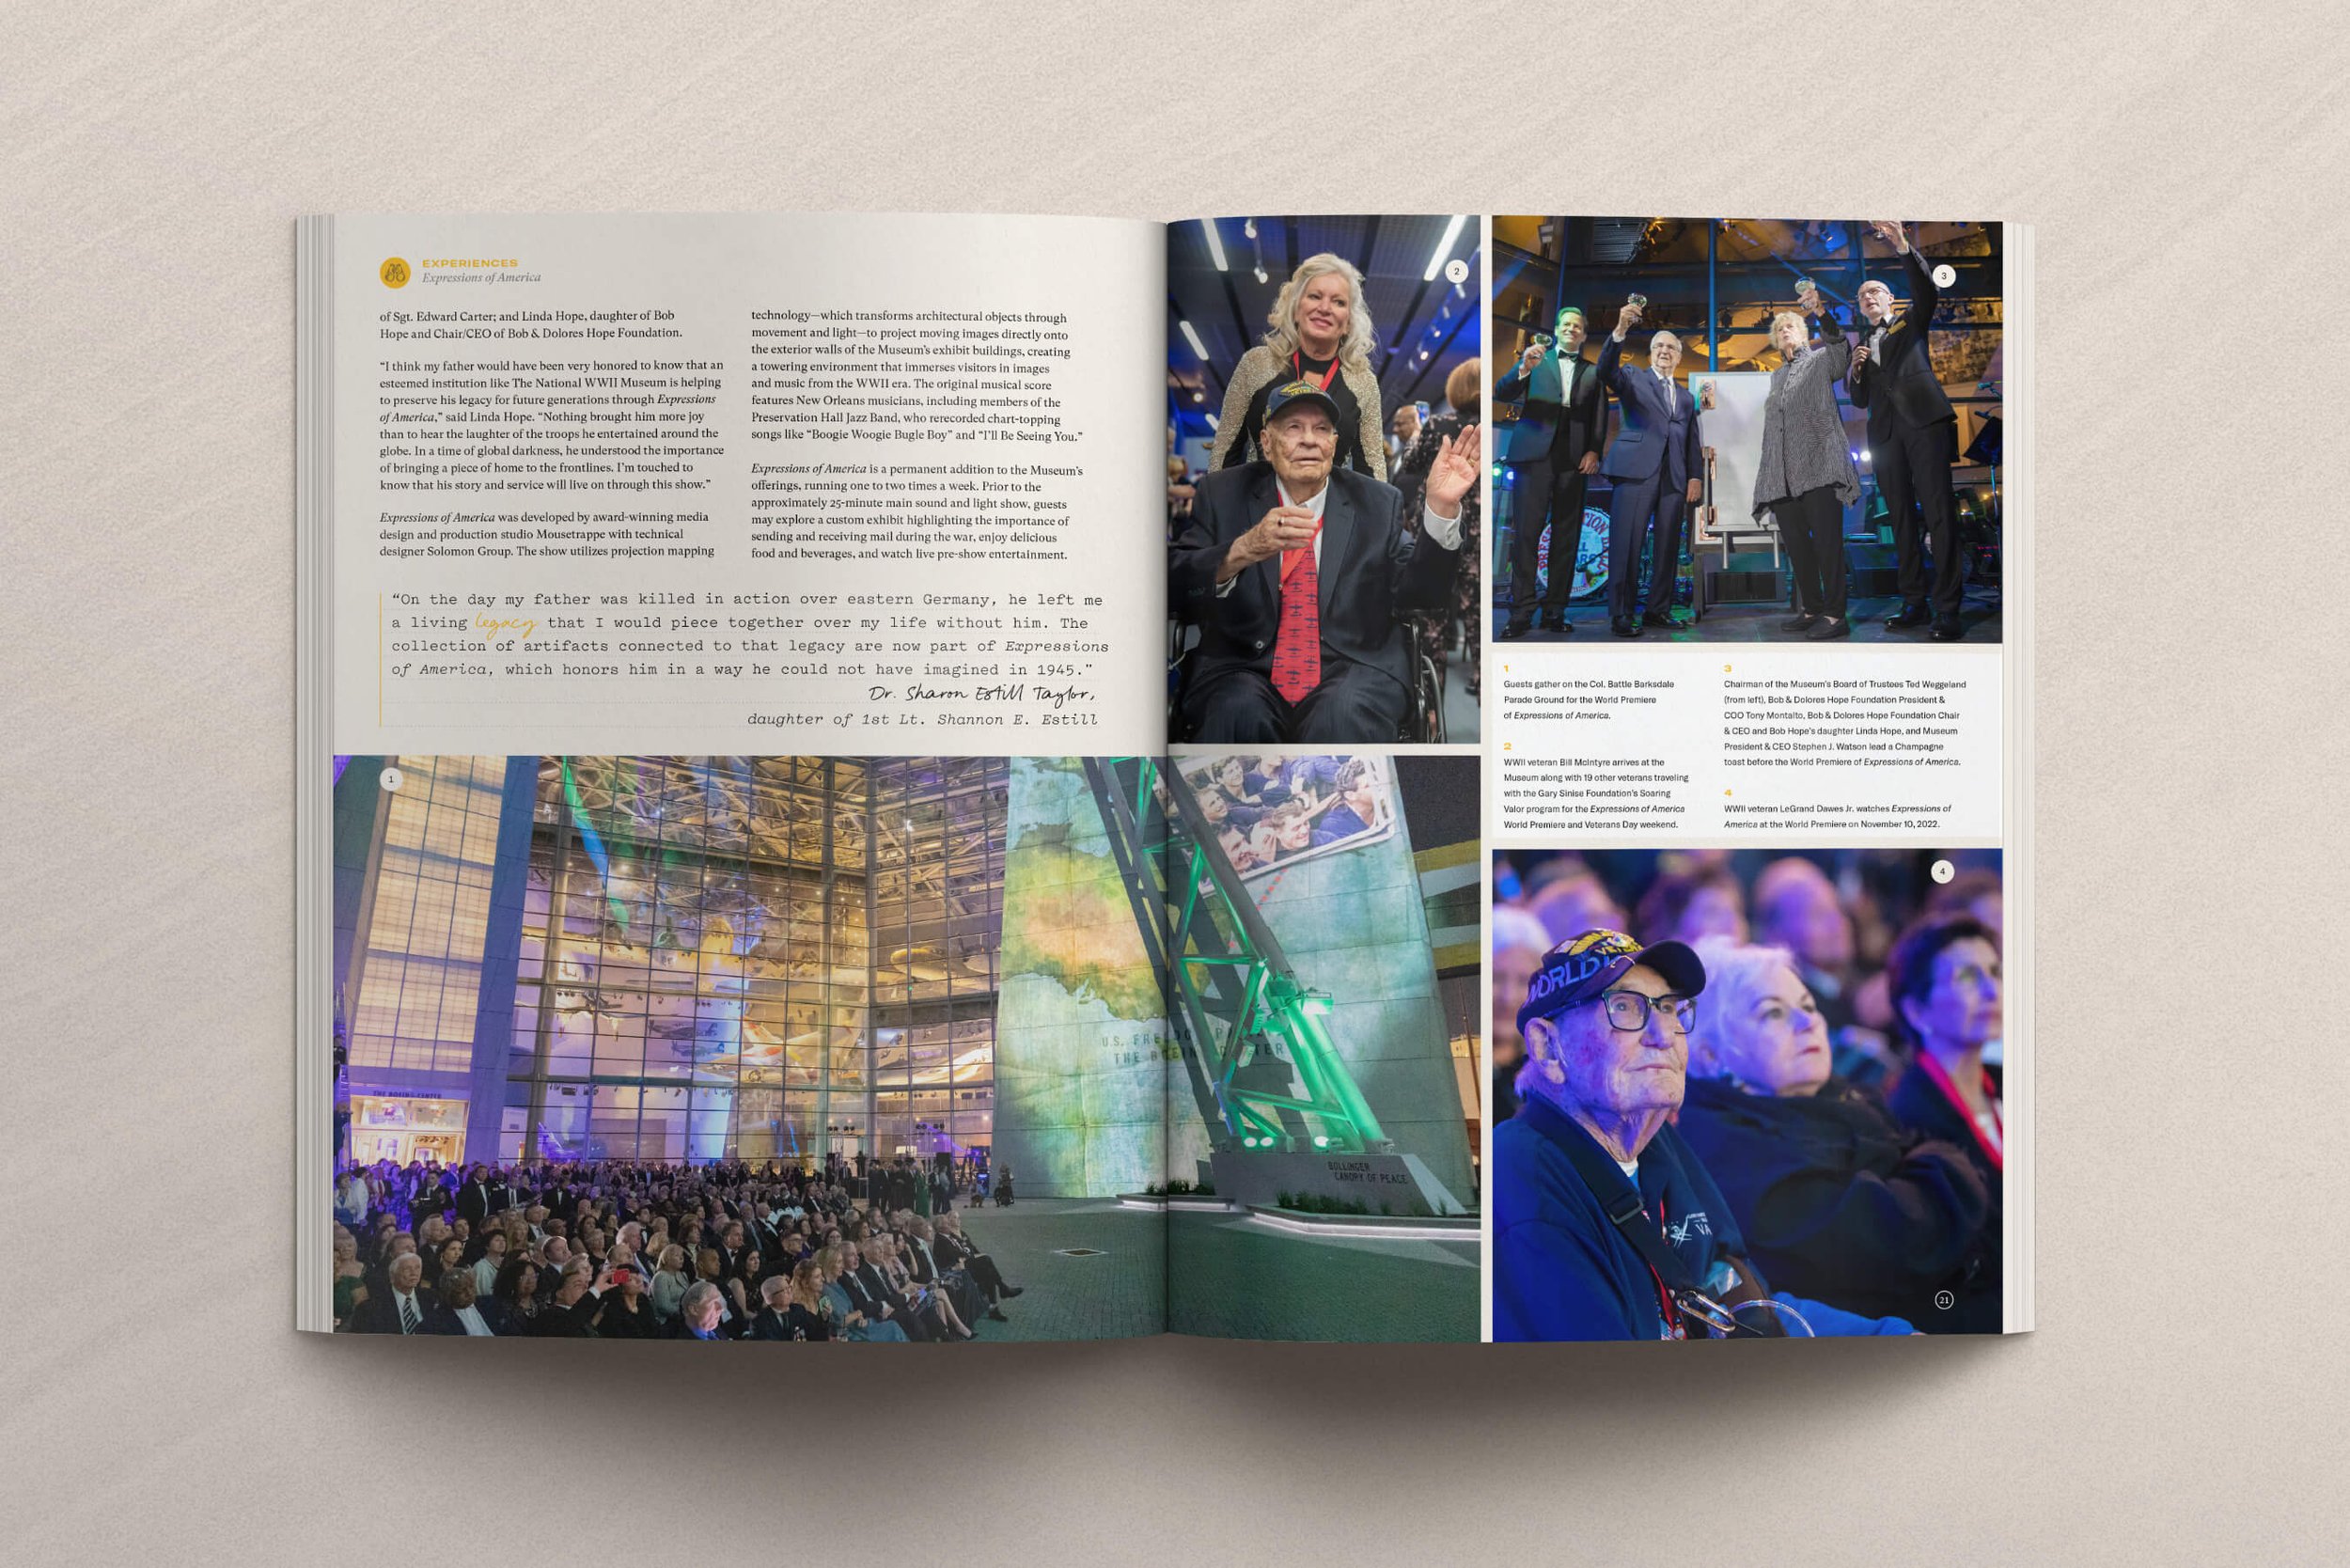  An annual report spread featuring images of people attending an opening event at the world war ii museum, with various panels showing speakers on stage and engaged audience members, set against a background of a large, illuminated venue. 